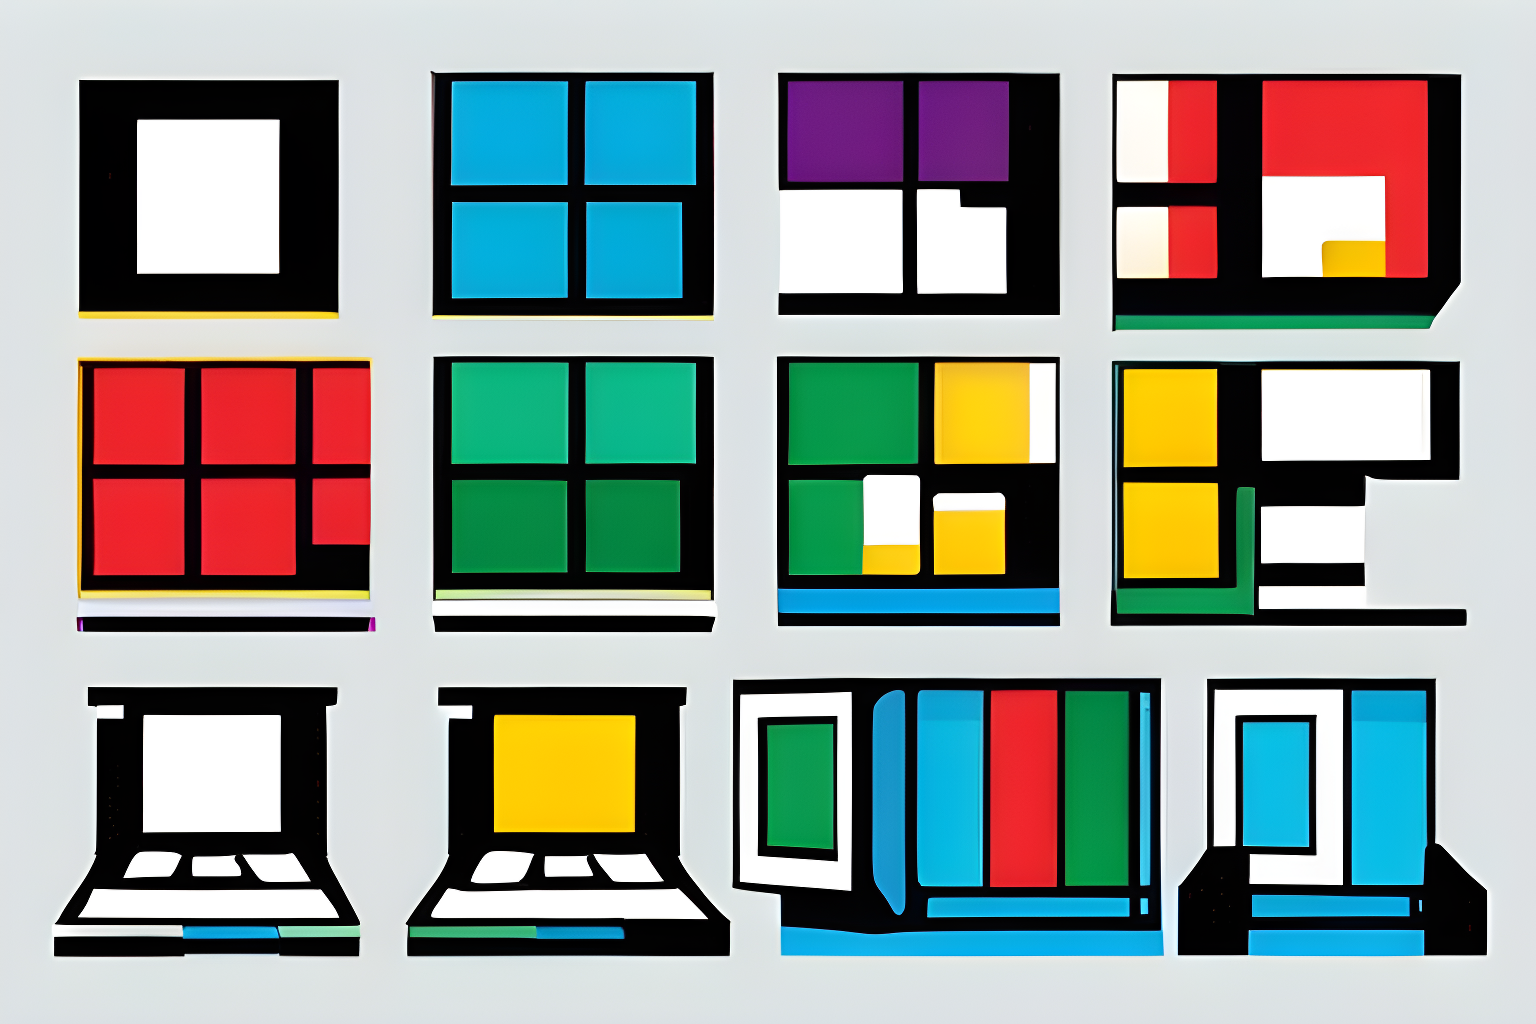 Design an illustration reminiscent of the Microsoft brand in the 90s, featuring the classic Windows 95 logo.